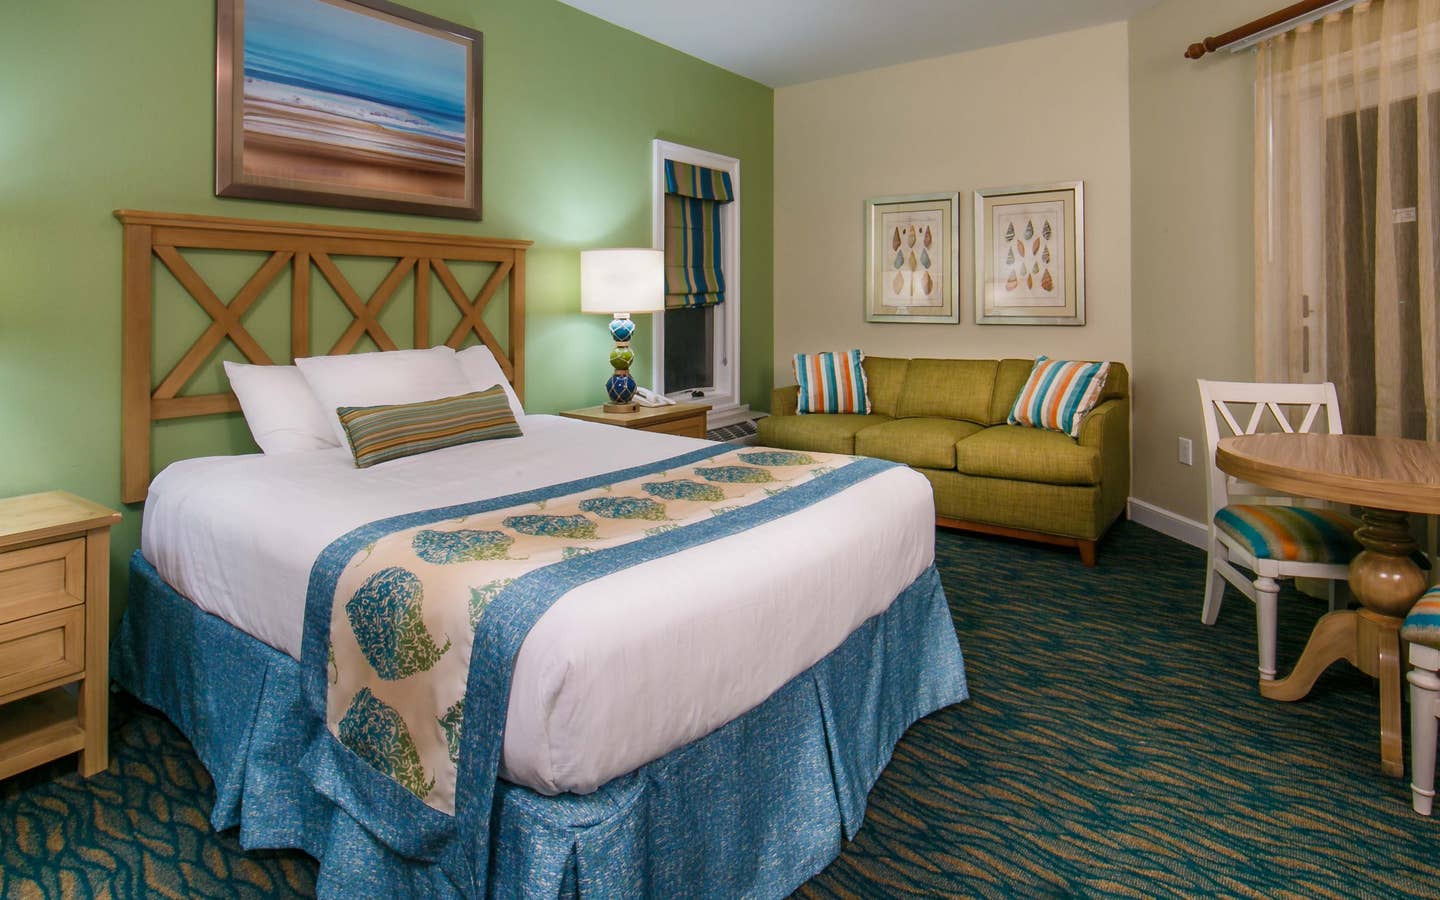 Studio room with a bed, couch and sitting area at South Beach Resort in Myrtle Beach, South Carolina.